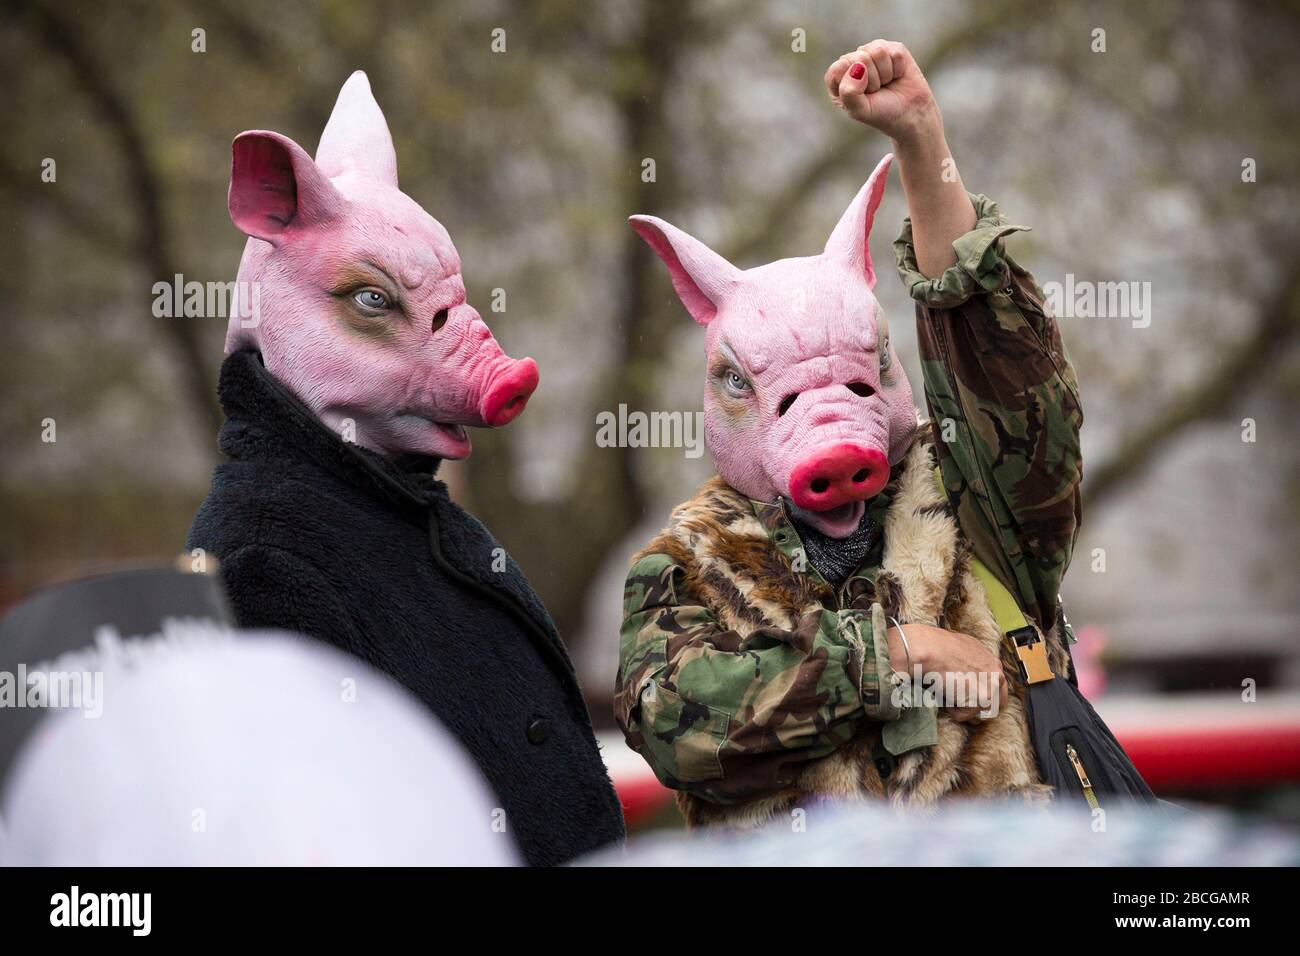 Two protesters wearing pig masks, one of whom has their fist raised in the air, at an Anti-Austerity demonstration in Trafalgar Square, London Stock Photo